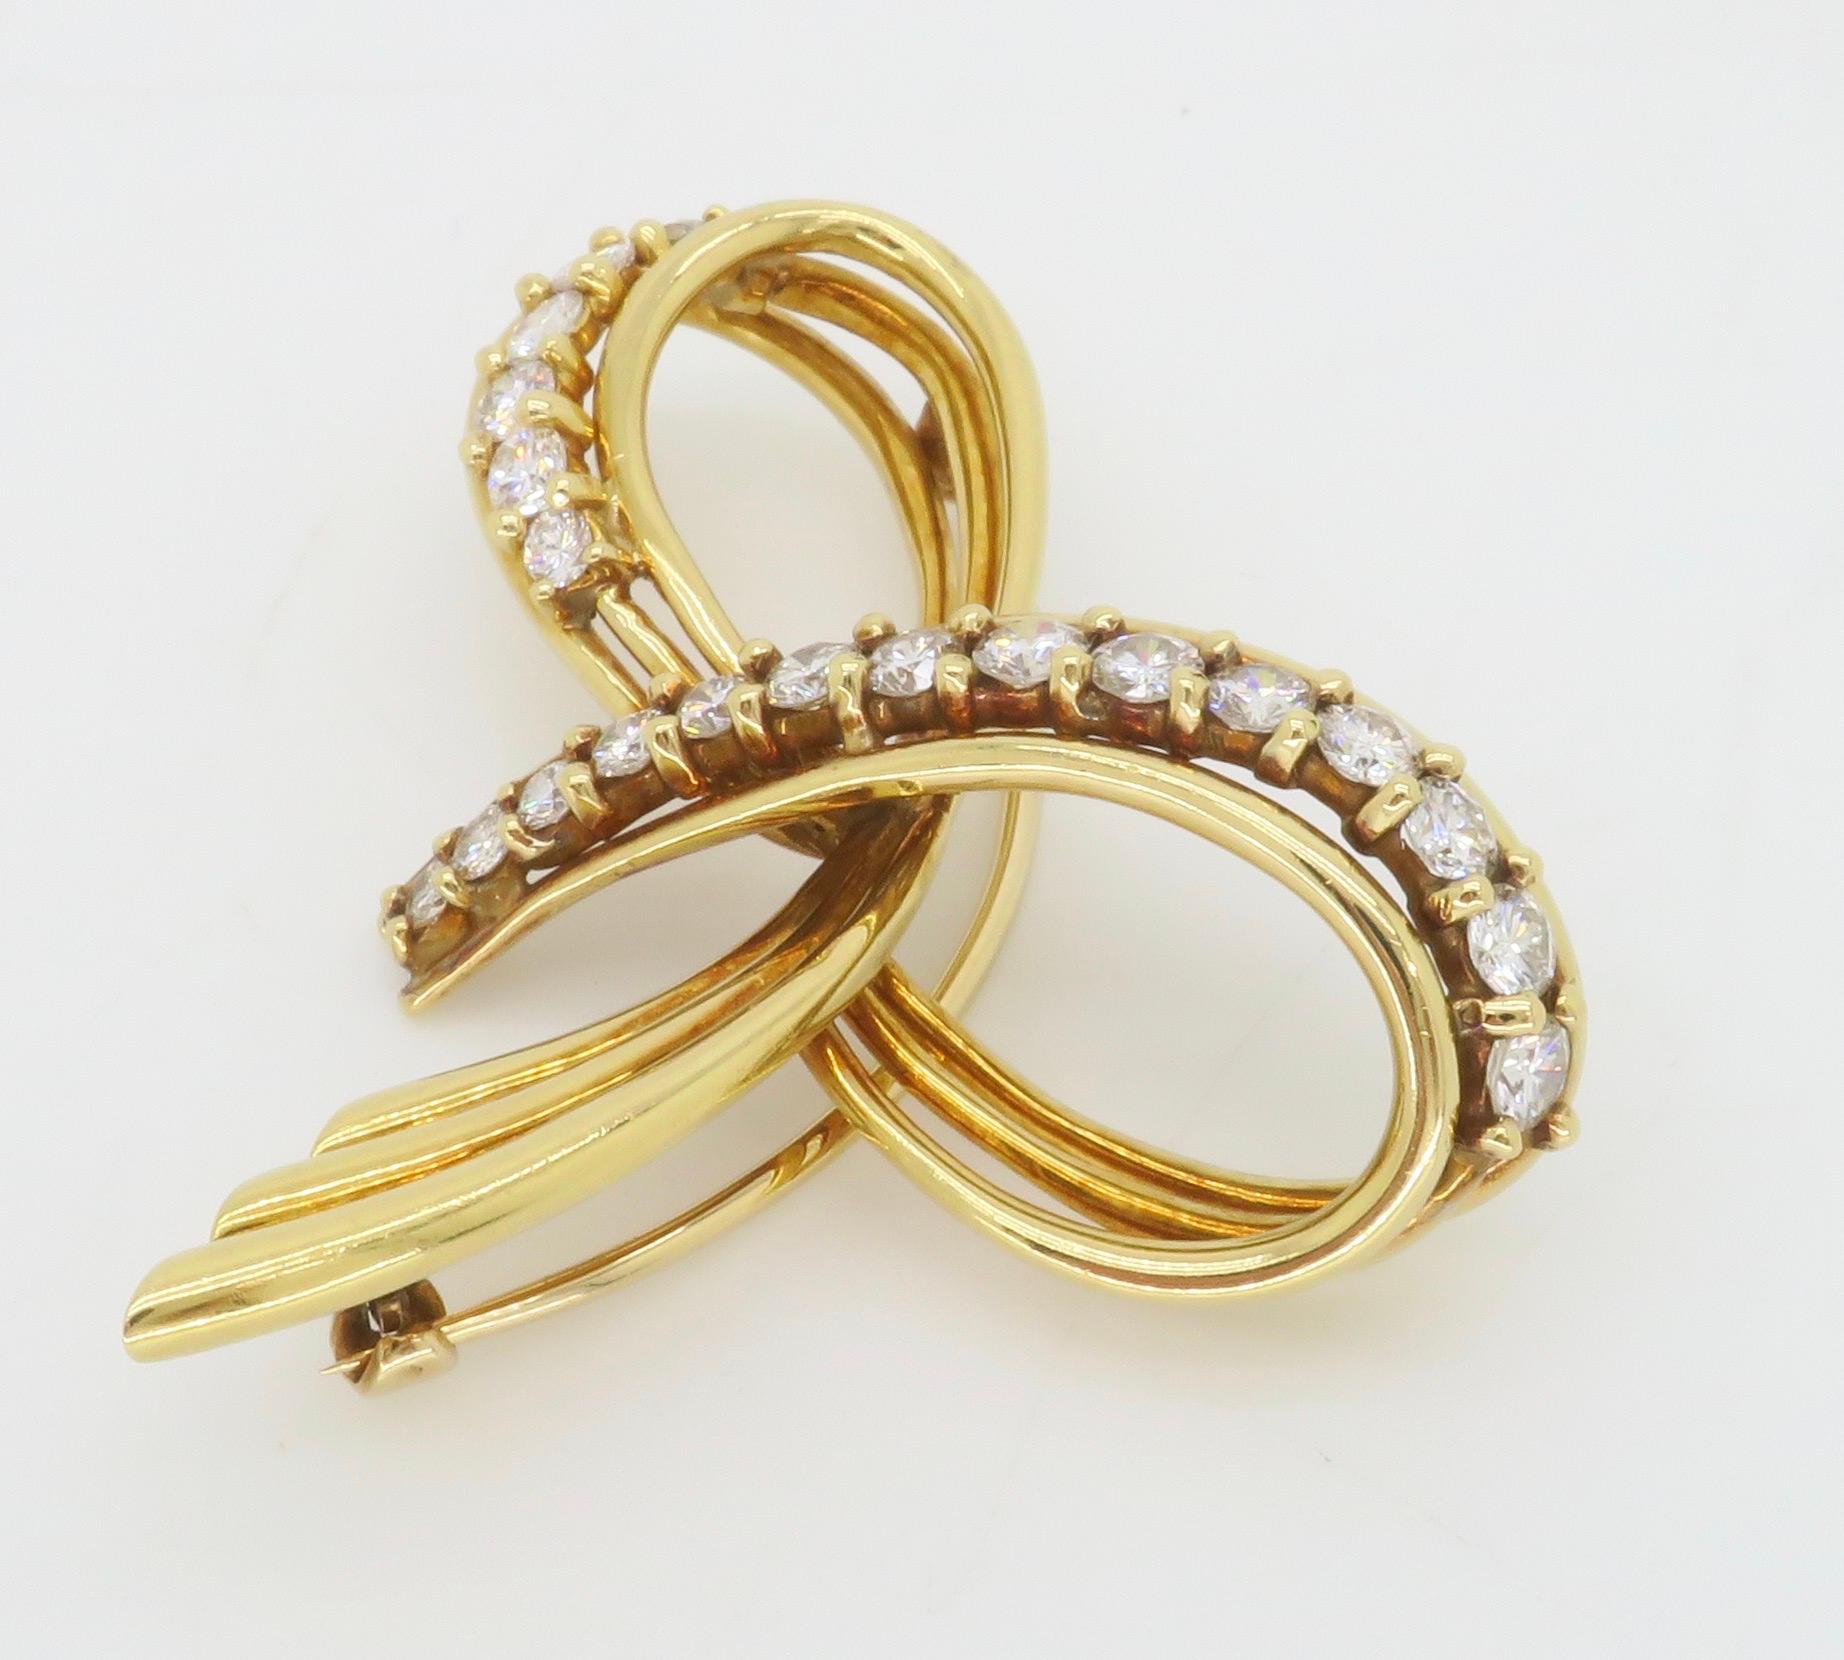 Vintage Tiffany & Co. Diamond brooch made in 18k yellow gold. 

Diamond Carat Weight: Approximately 1.80CTW
Diamond Cut: Round Brilliant Cut Diamonds 
Color: Average E-F
Clarity: Average VS
Metal: 18k Yellow Gold 
Stamped: 